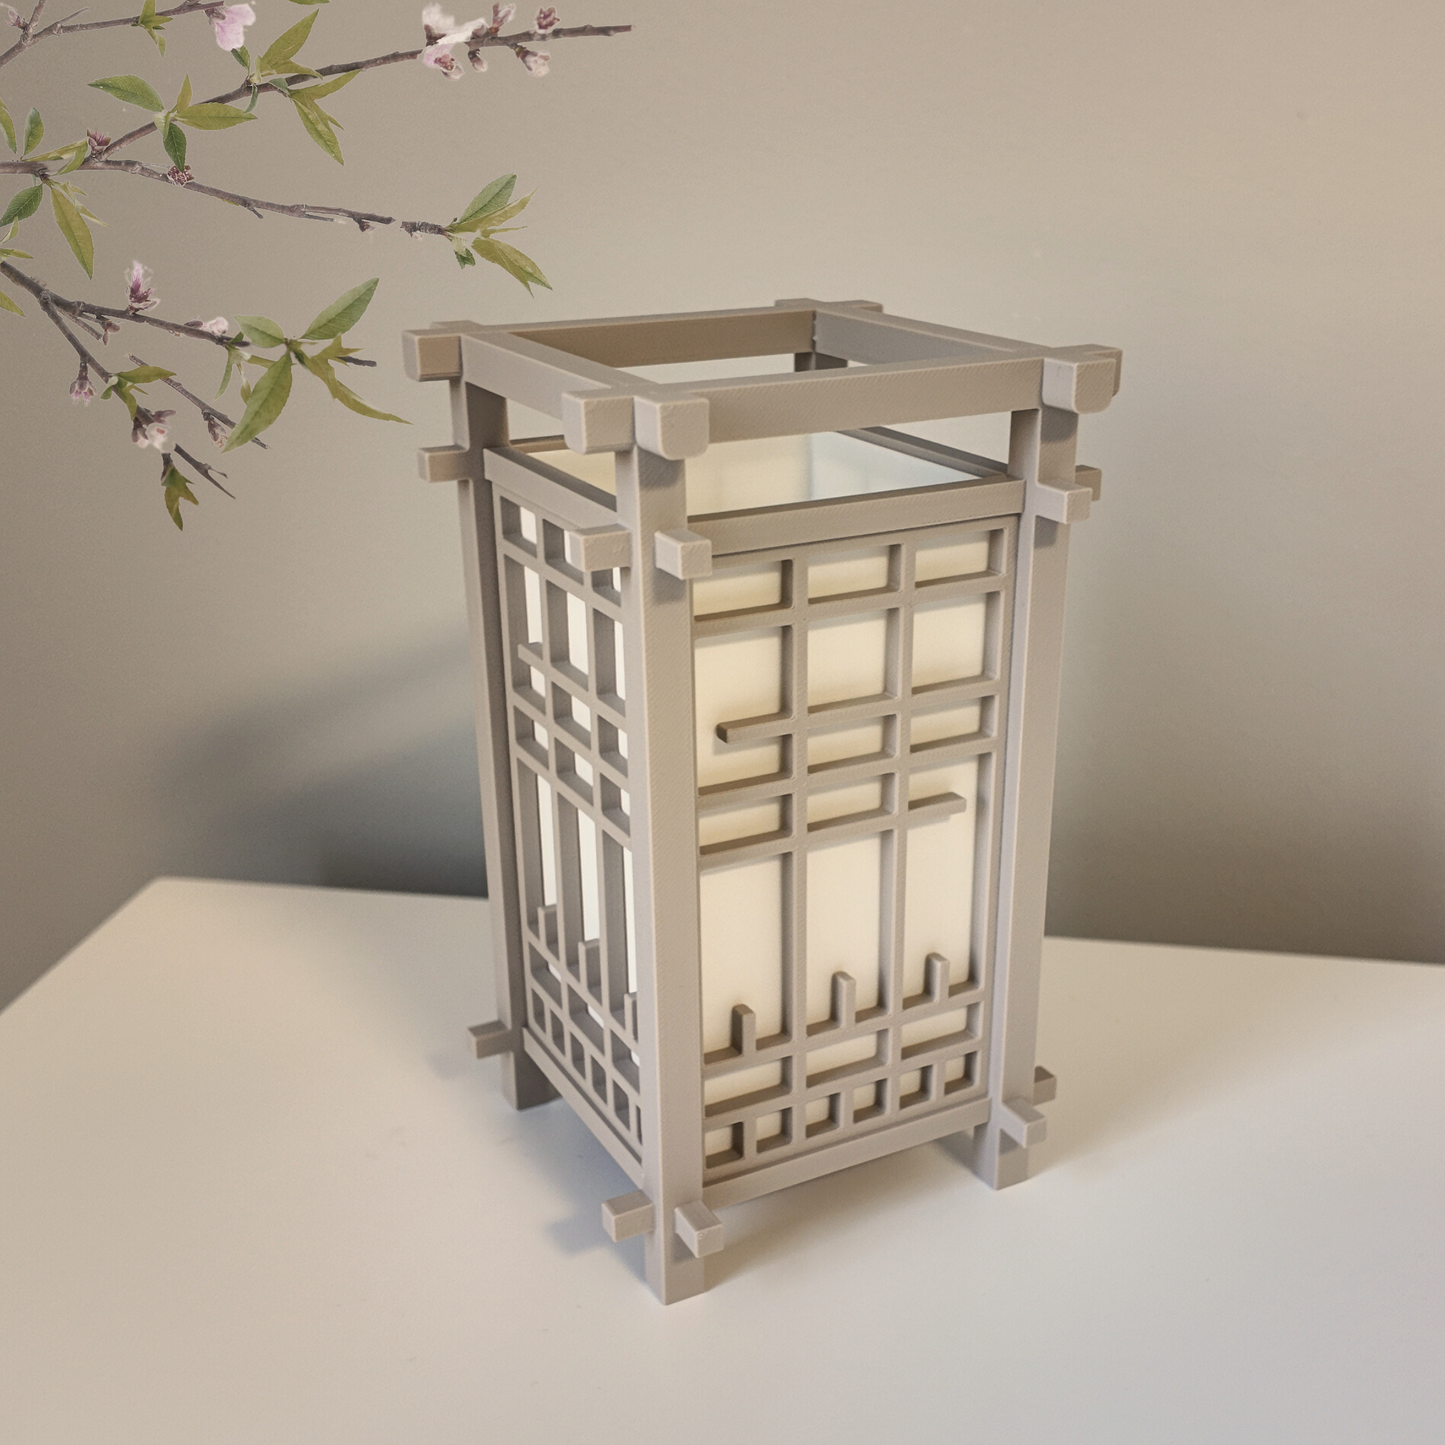 Japanese Shoji Style Lantern - Exquisite Japanese Decor for Home and Room | Unique Desk Lamp and Table Lamp Design | Mini Japanese Lantern Transforms Any Space